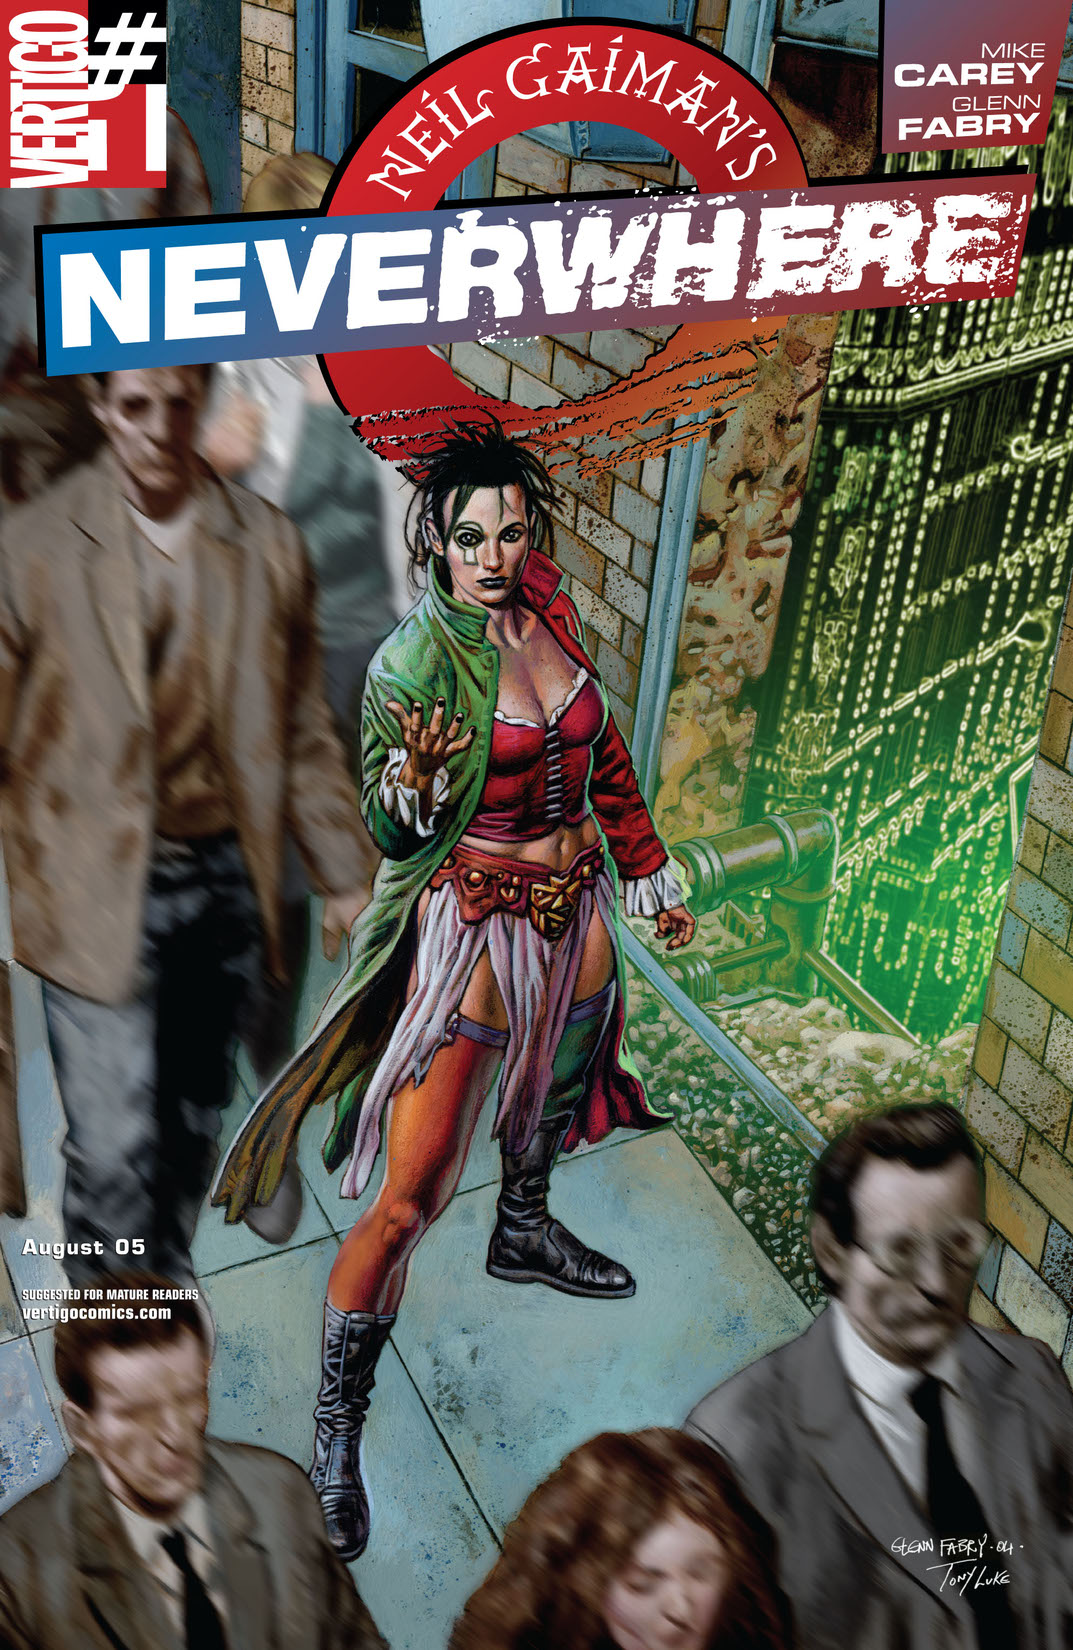 Neil Gaiman's Neverwhere #1 preview images